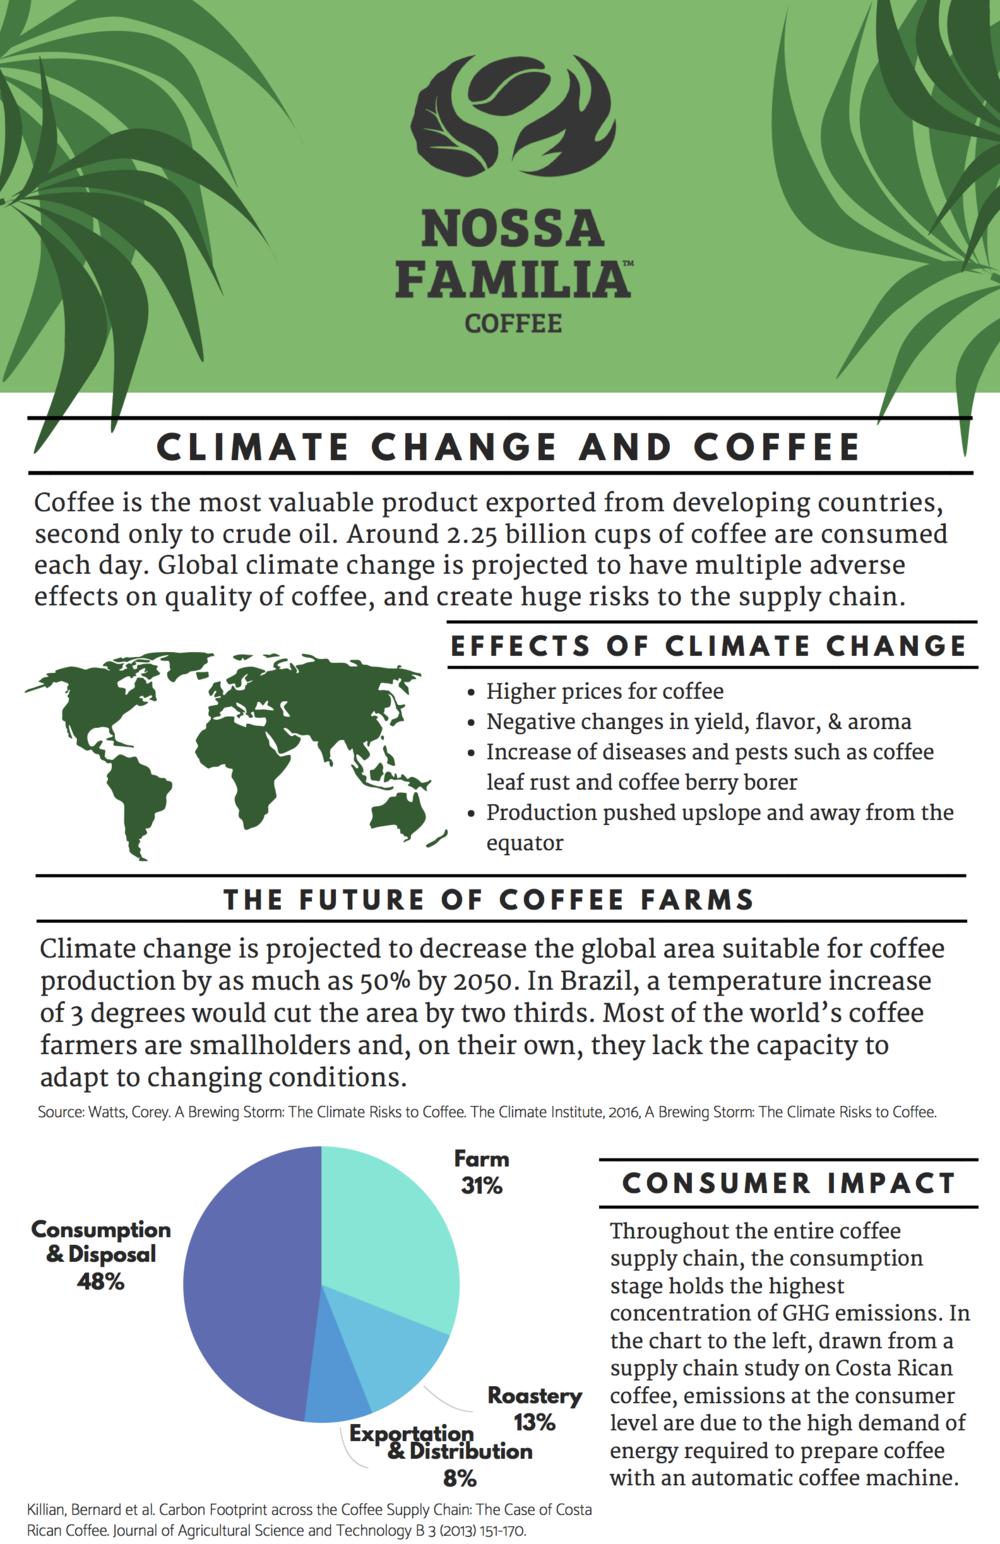 Resources on Sustainability in Coffee